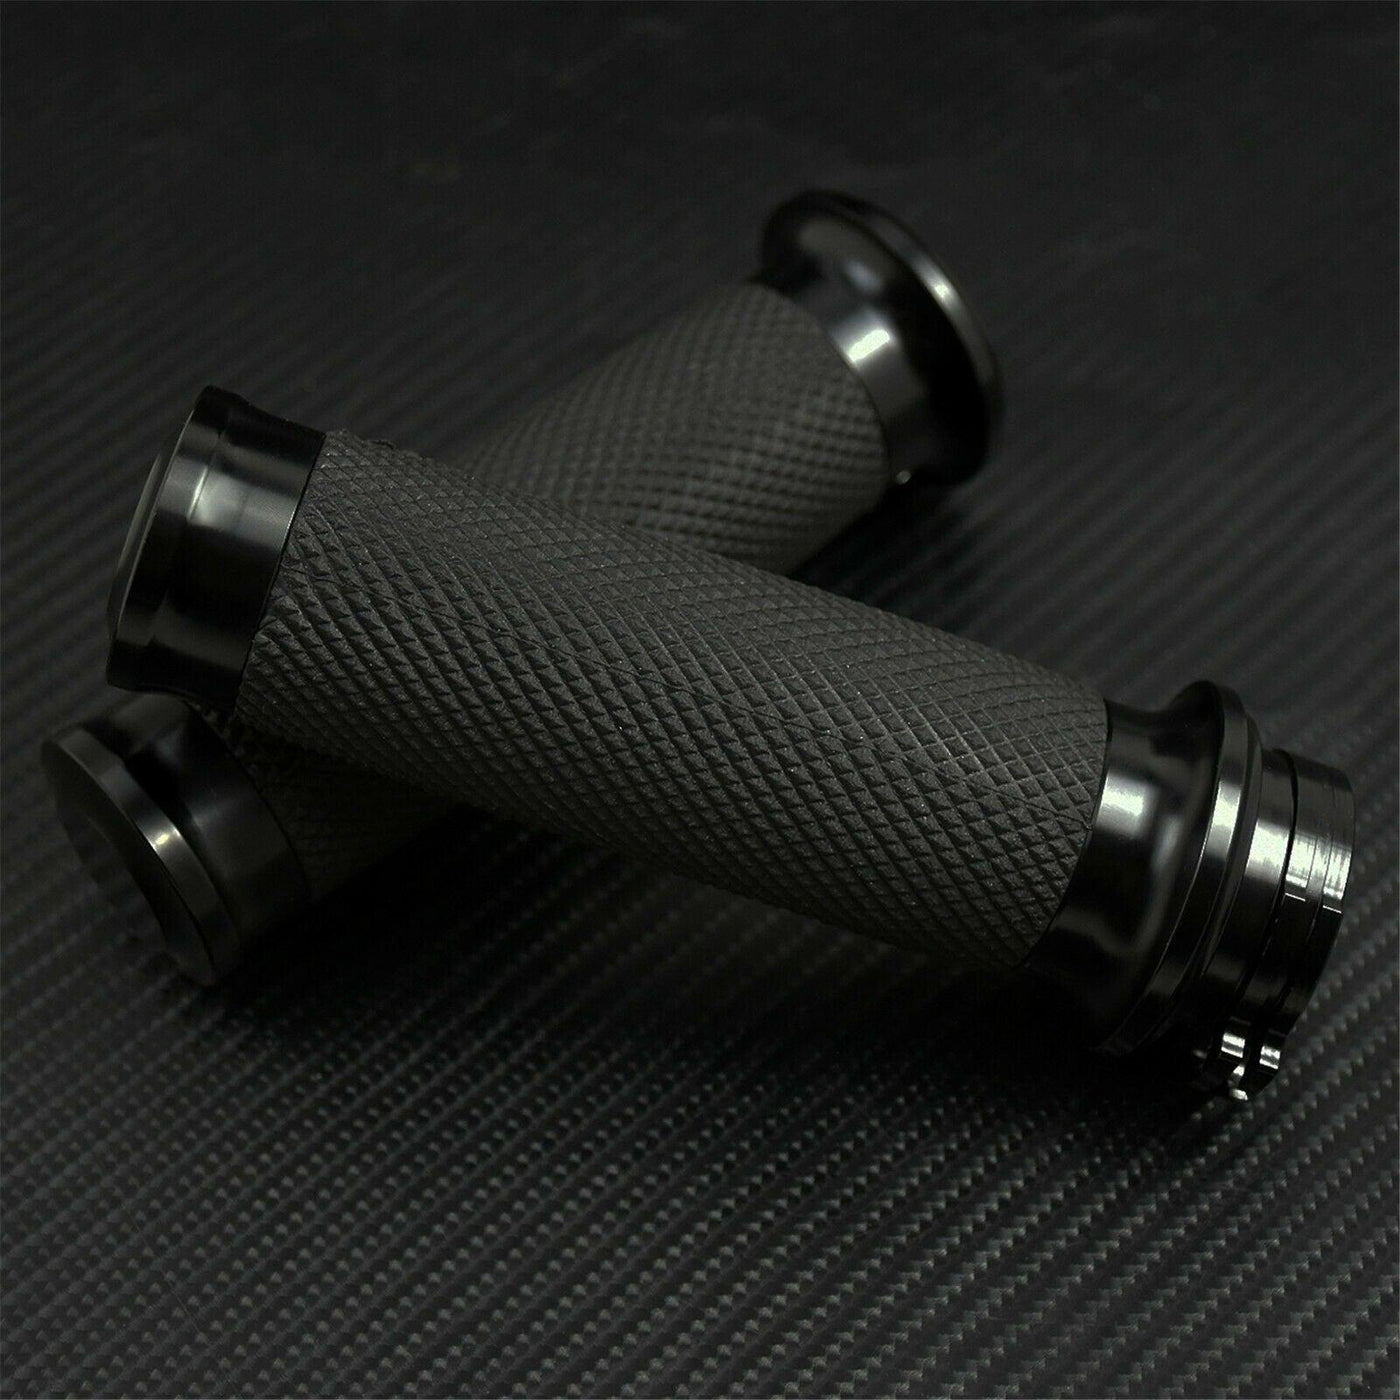 1“ Black Handle Bar Hand grips Fit For Harley Touring Sportster XL883 XL1200 - Moto Life Products